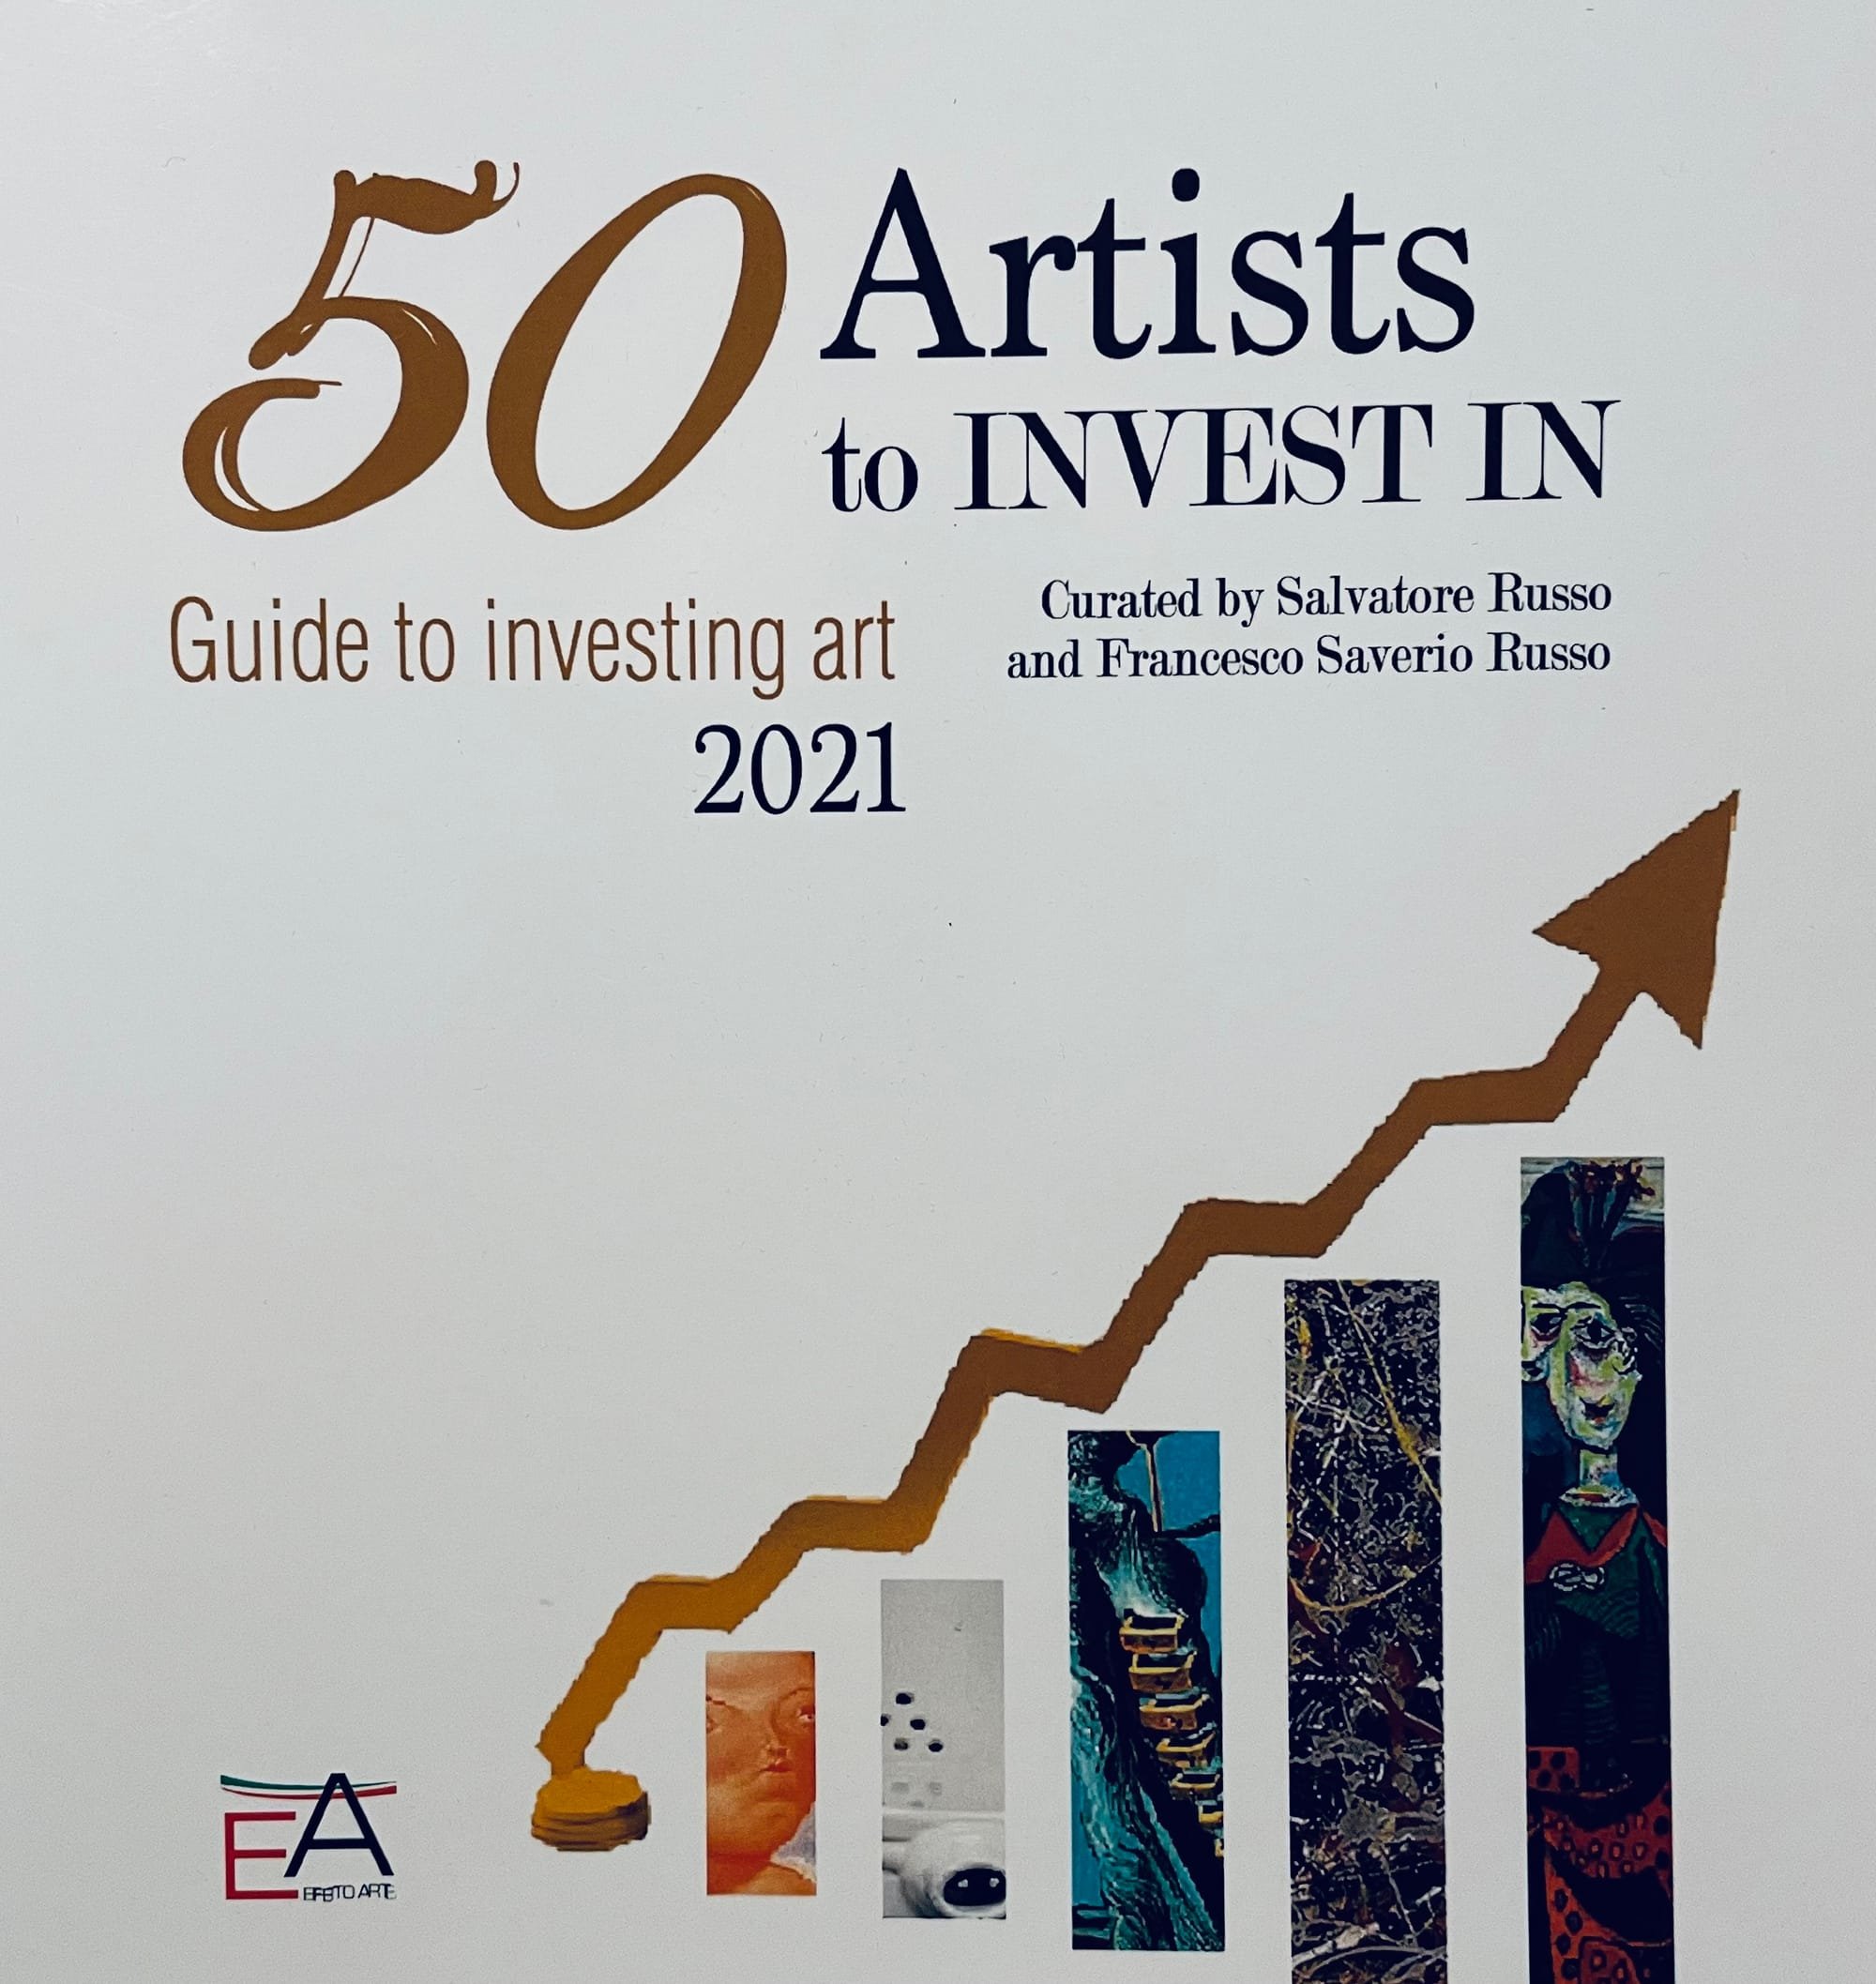 50 Artists to Invest In